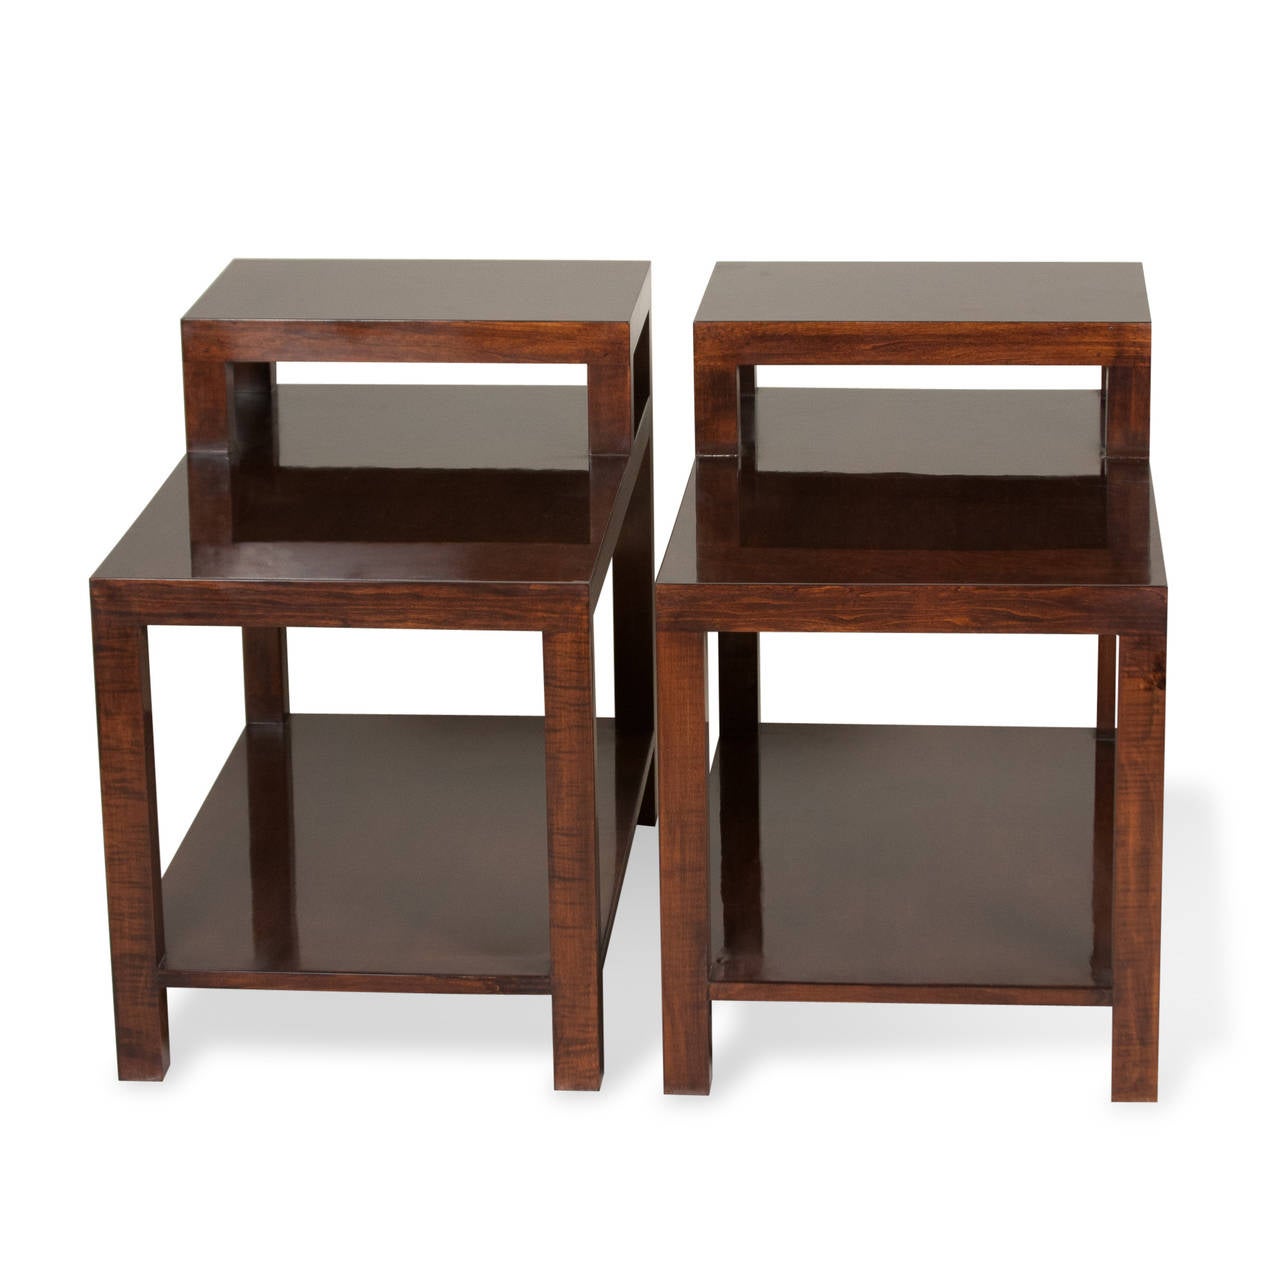 Pair of teak stepped end tables, the legs and supports of squared wooden form, and having lower shelf, by T. H. Robsjohn-Gibbings for Widdicomb, American, 1950s. Measures: 30 in x 18 in, height in back 24 1/2 in, height in front 19 1/2 in. (Item